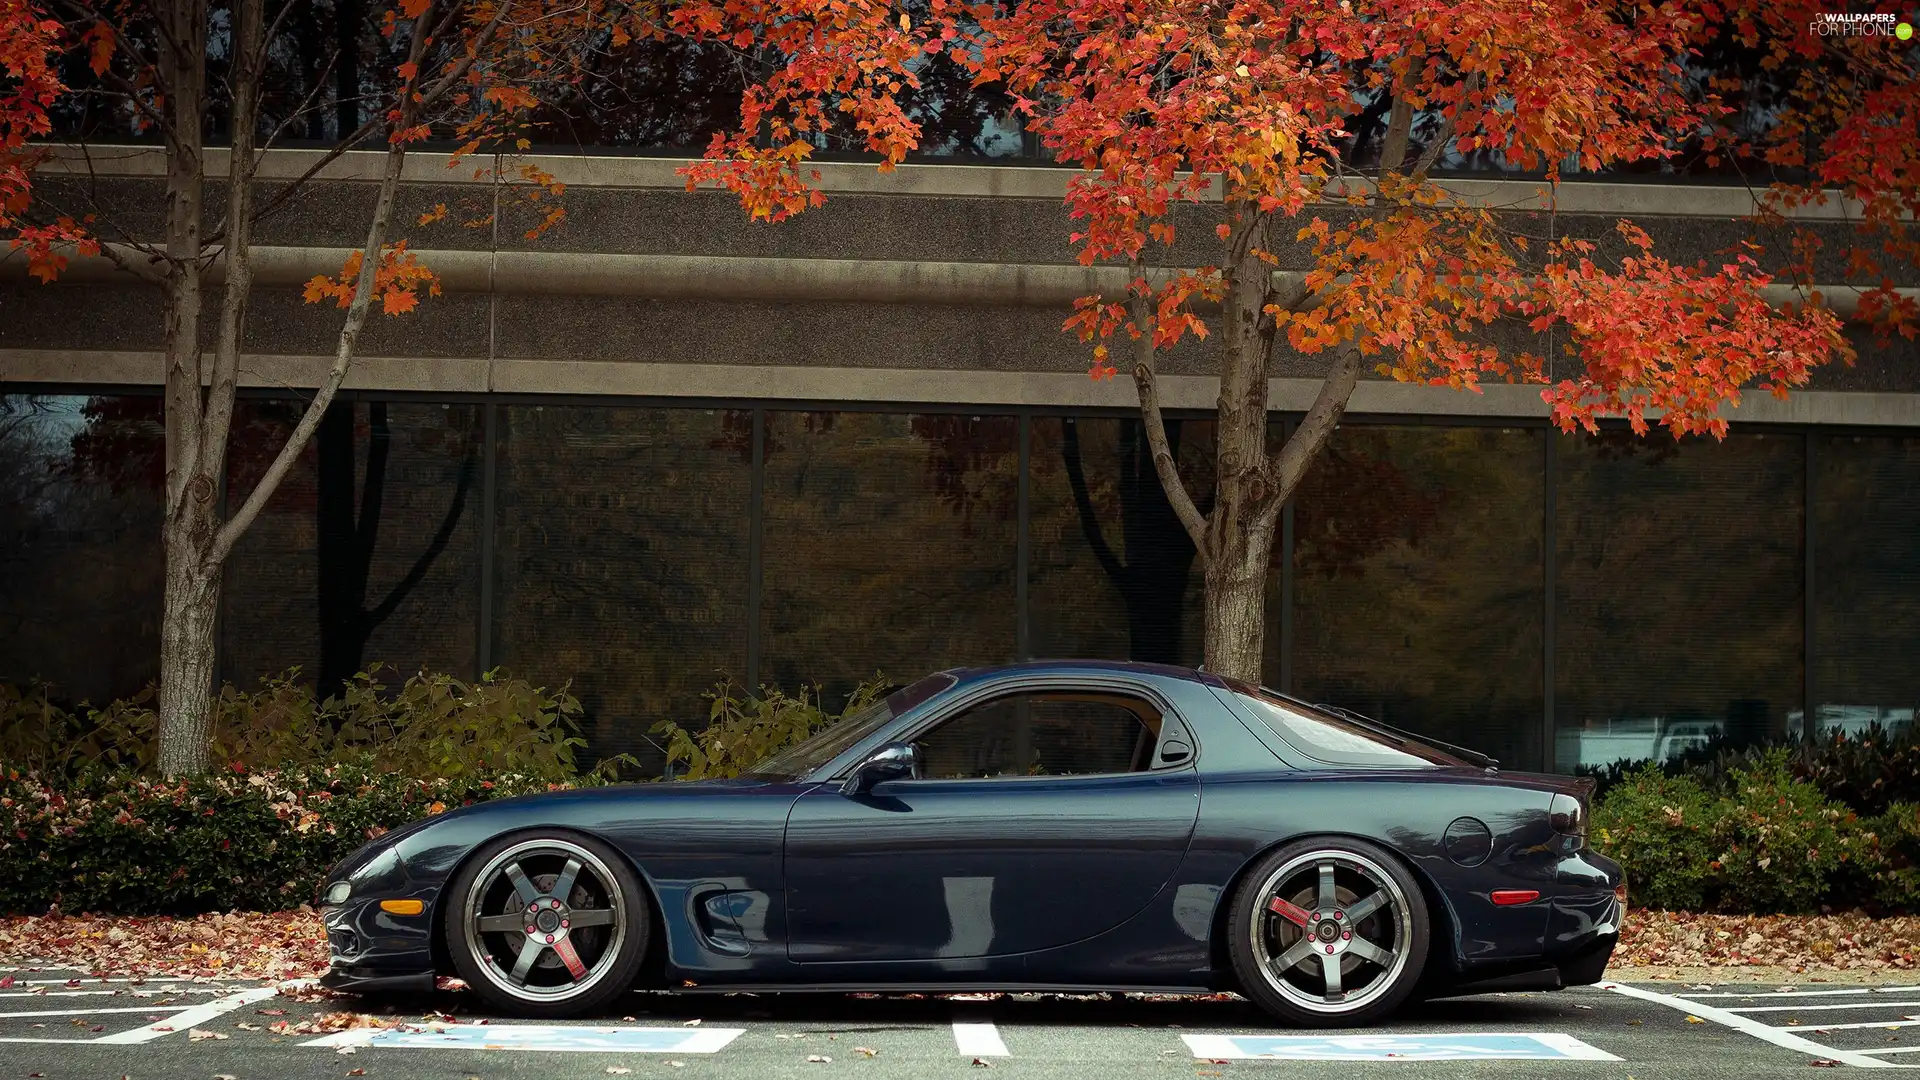 trees, viewes, Rx-7, parking, Mazda